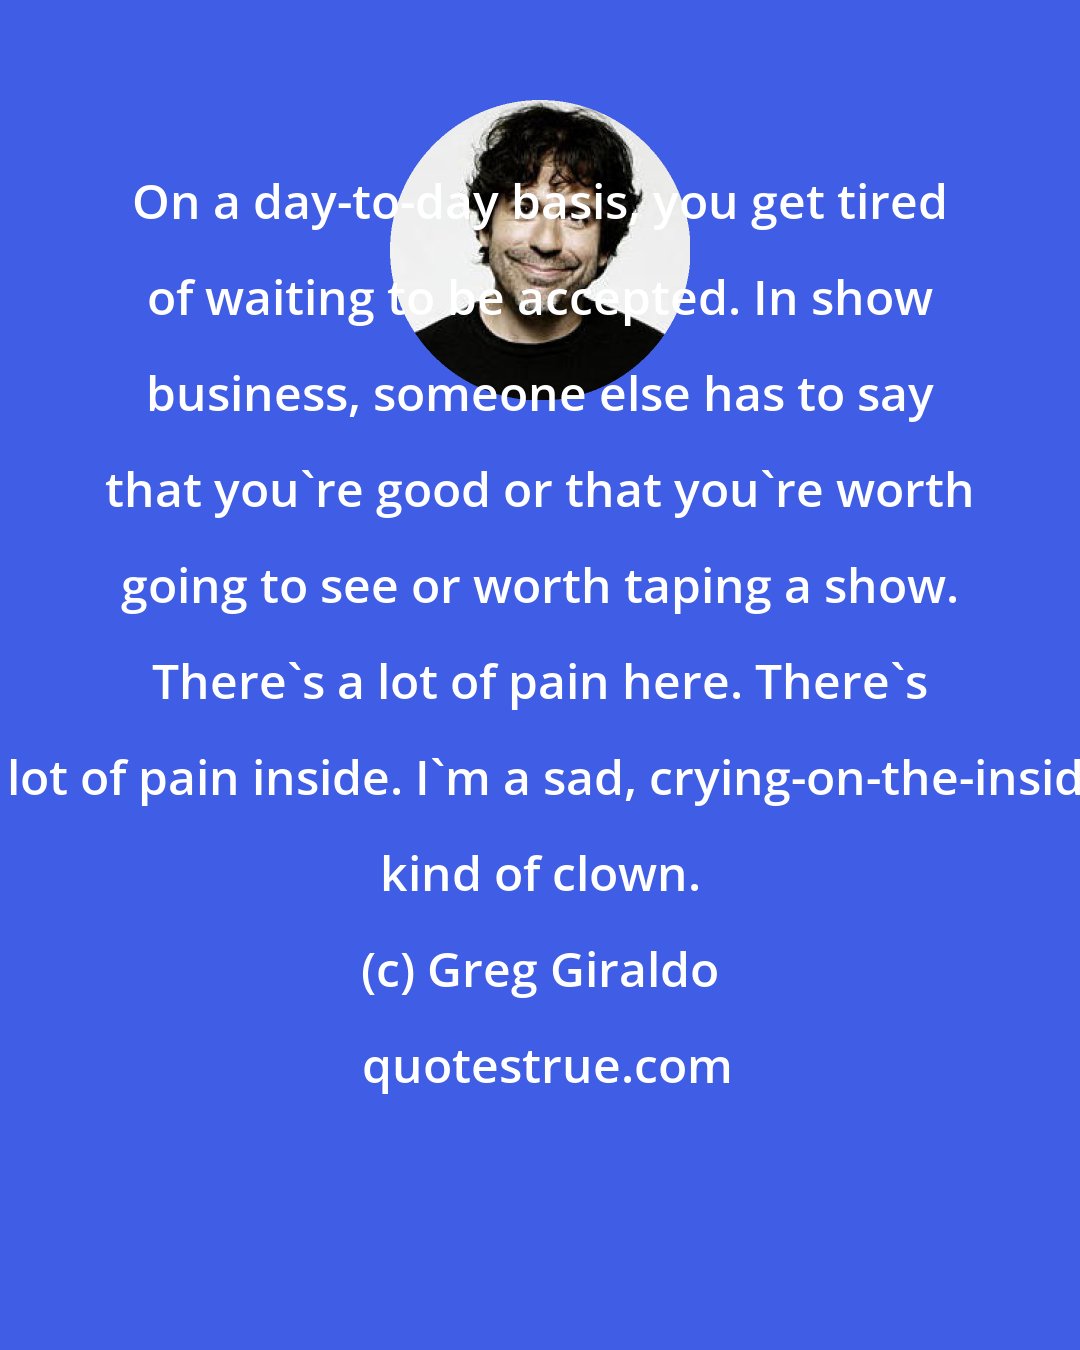 Greg Giraldo: On a day-to-day basis, you get tired of waiting to be accepted. In show business, someone else has to say that you're good or that you're worth going to see or worth taping a show. There's a lot of pain here. There's a lot of pain inside. I'm a sad, crying-on-the-inside kind of clown.